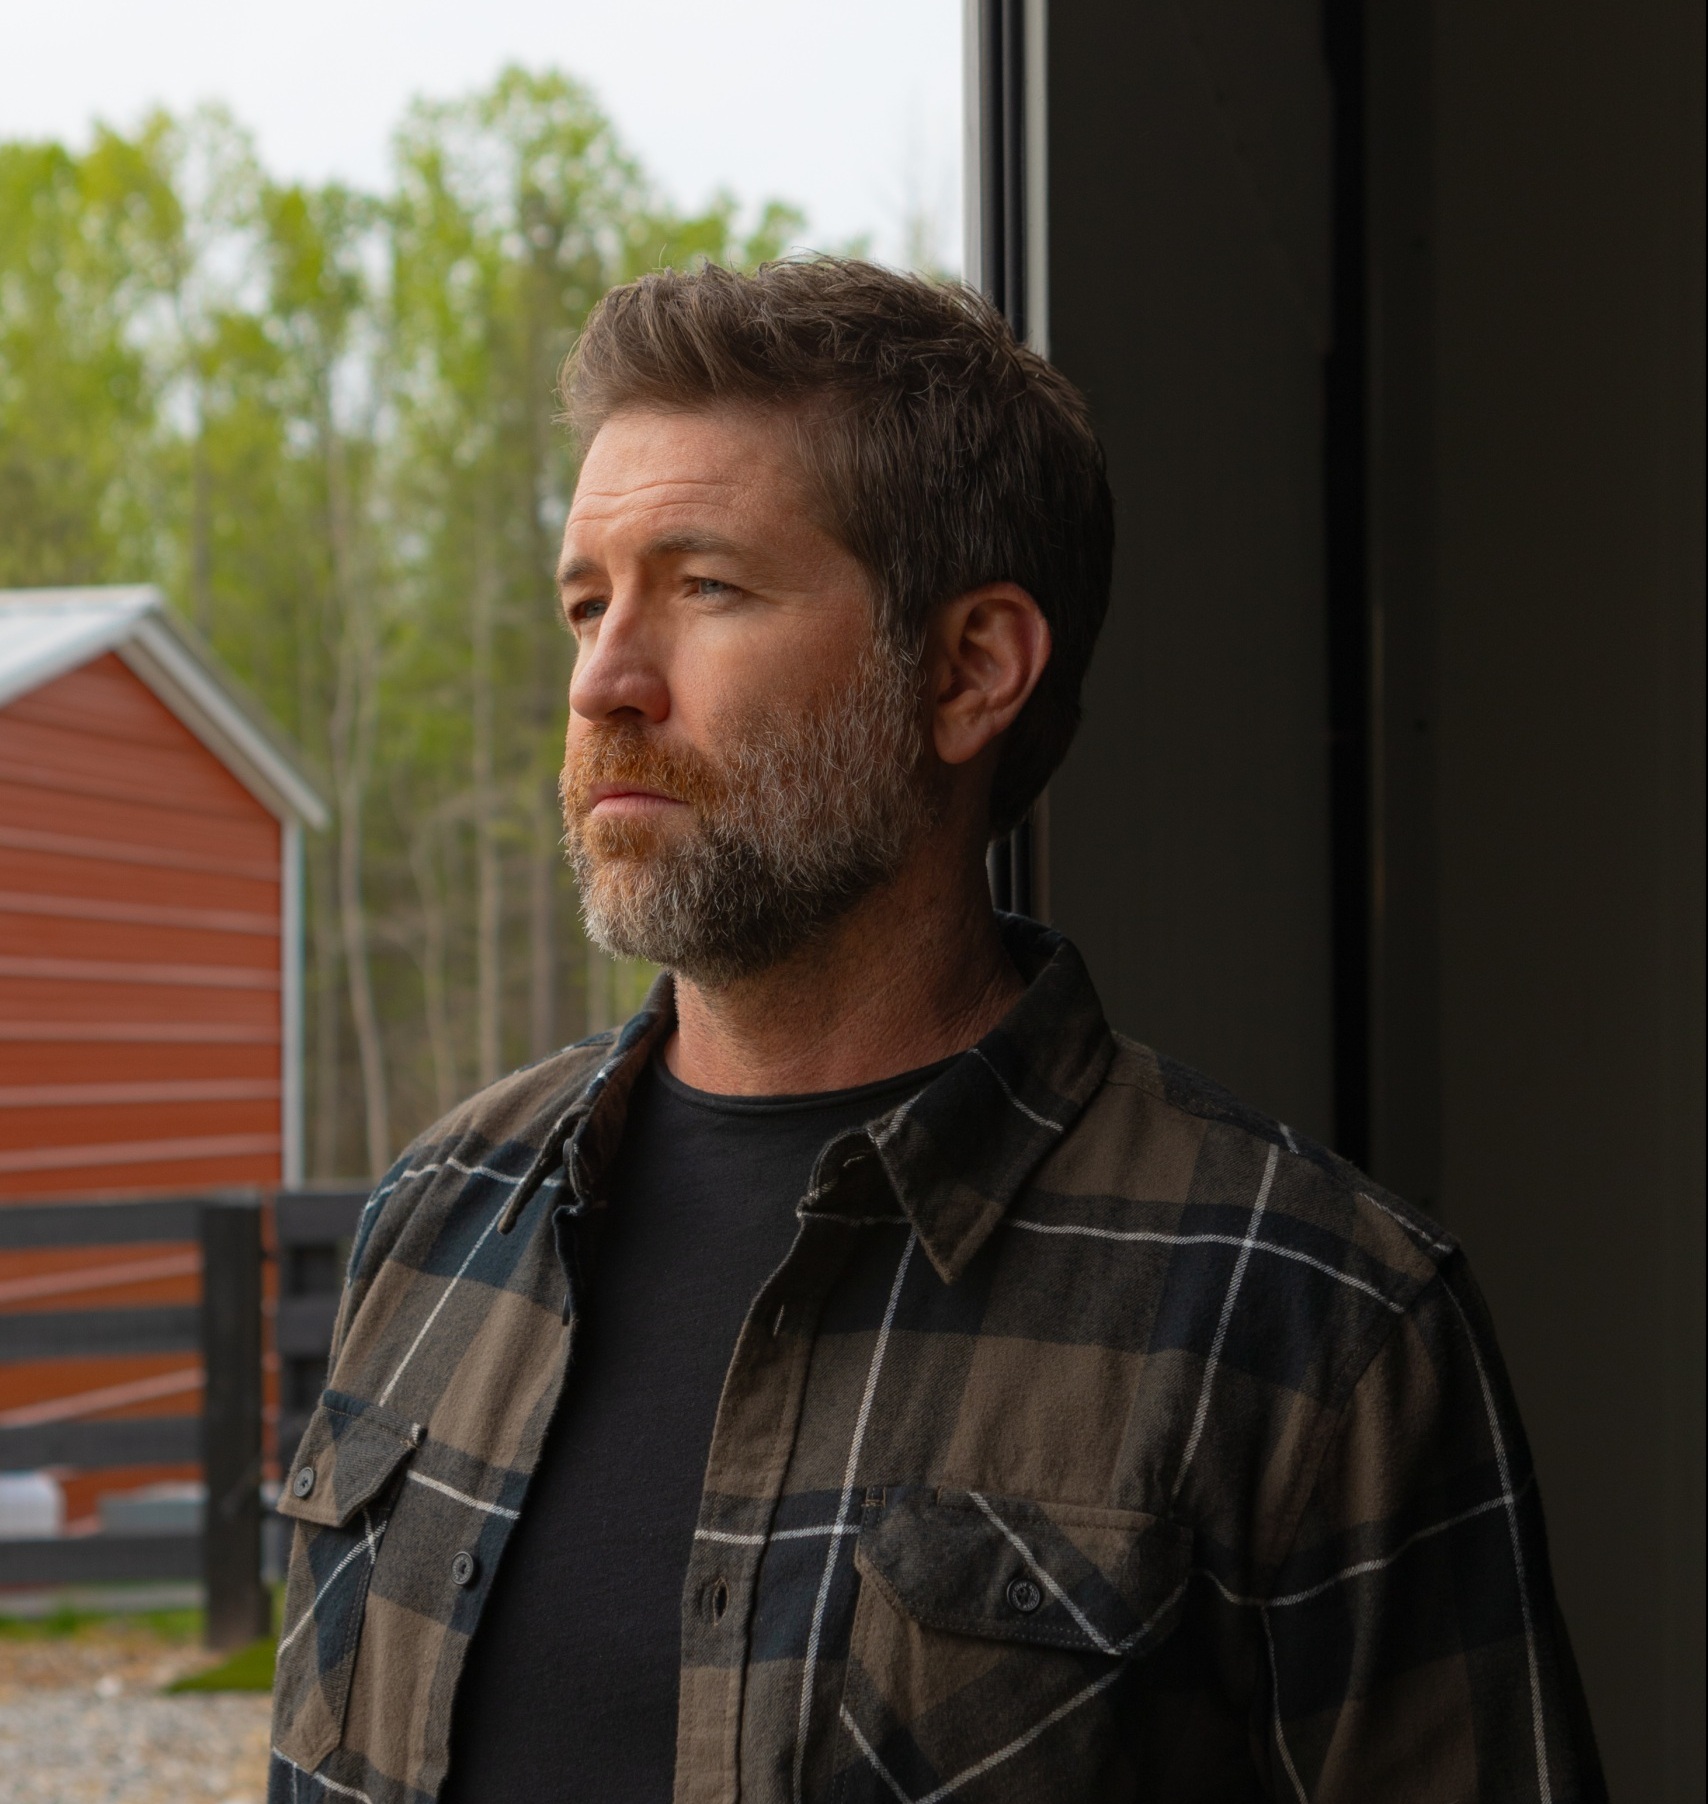 JOSH TURNER DROPS NEW TRACK  “HEATIN’ THINGS UP,” THE FIRST SONG OFF HIS NEW ALBUM TO BE RELEASED LATER THIS YEAR.